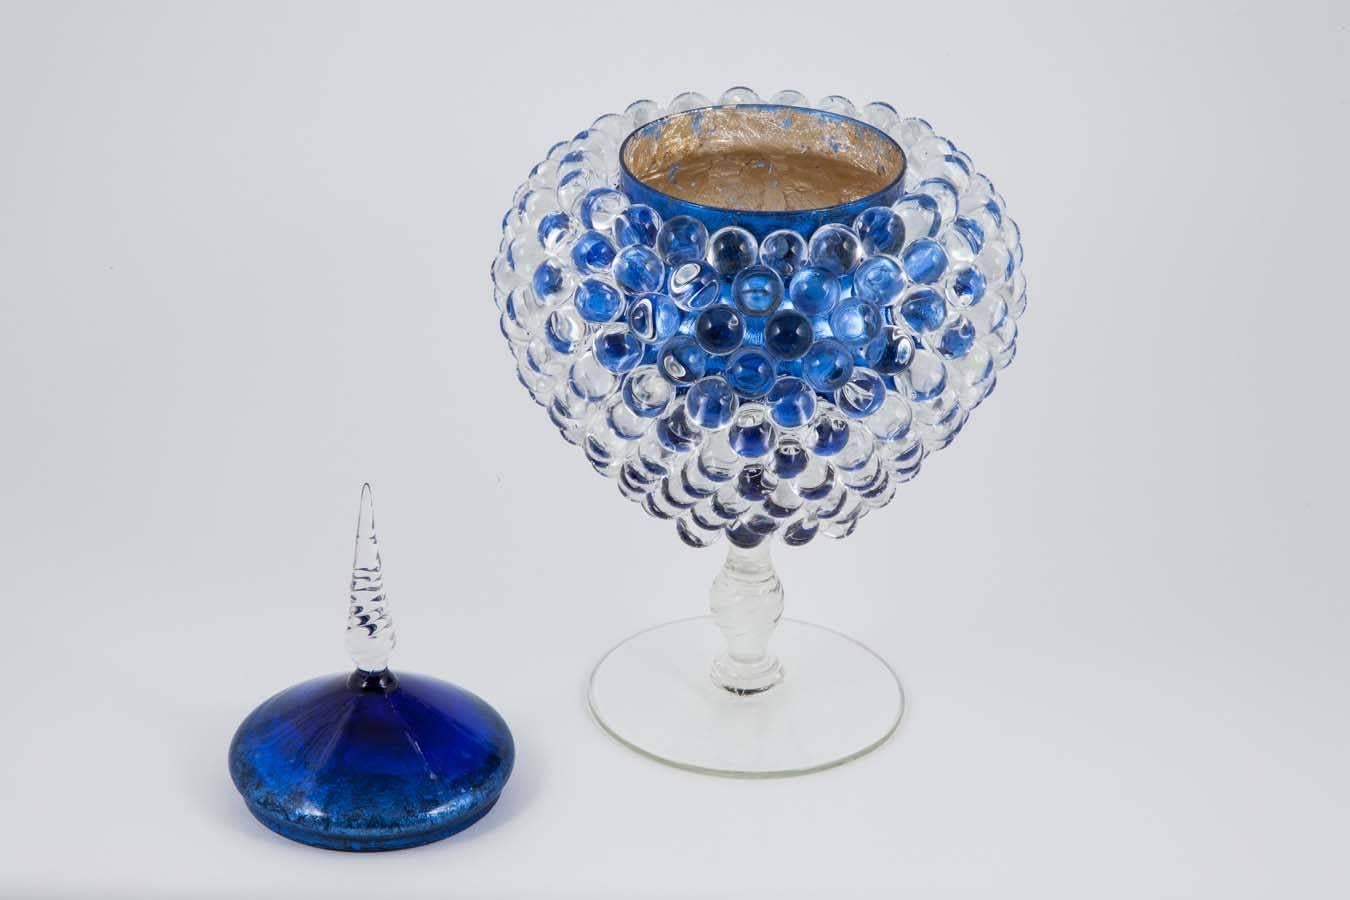 Empoli Jar with Spike, a unique clear & blue glass vessel by James Lethbridge In New Condition For Sale In London, GB